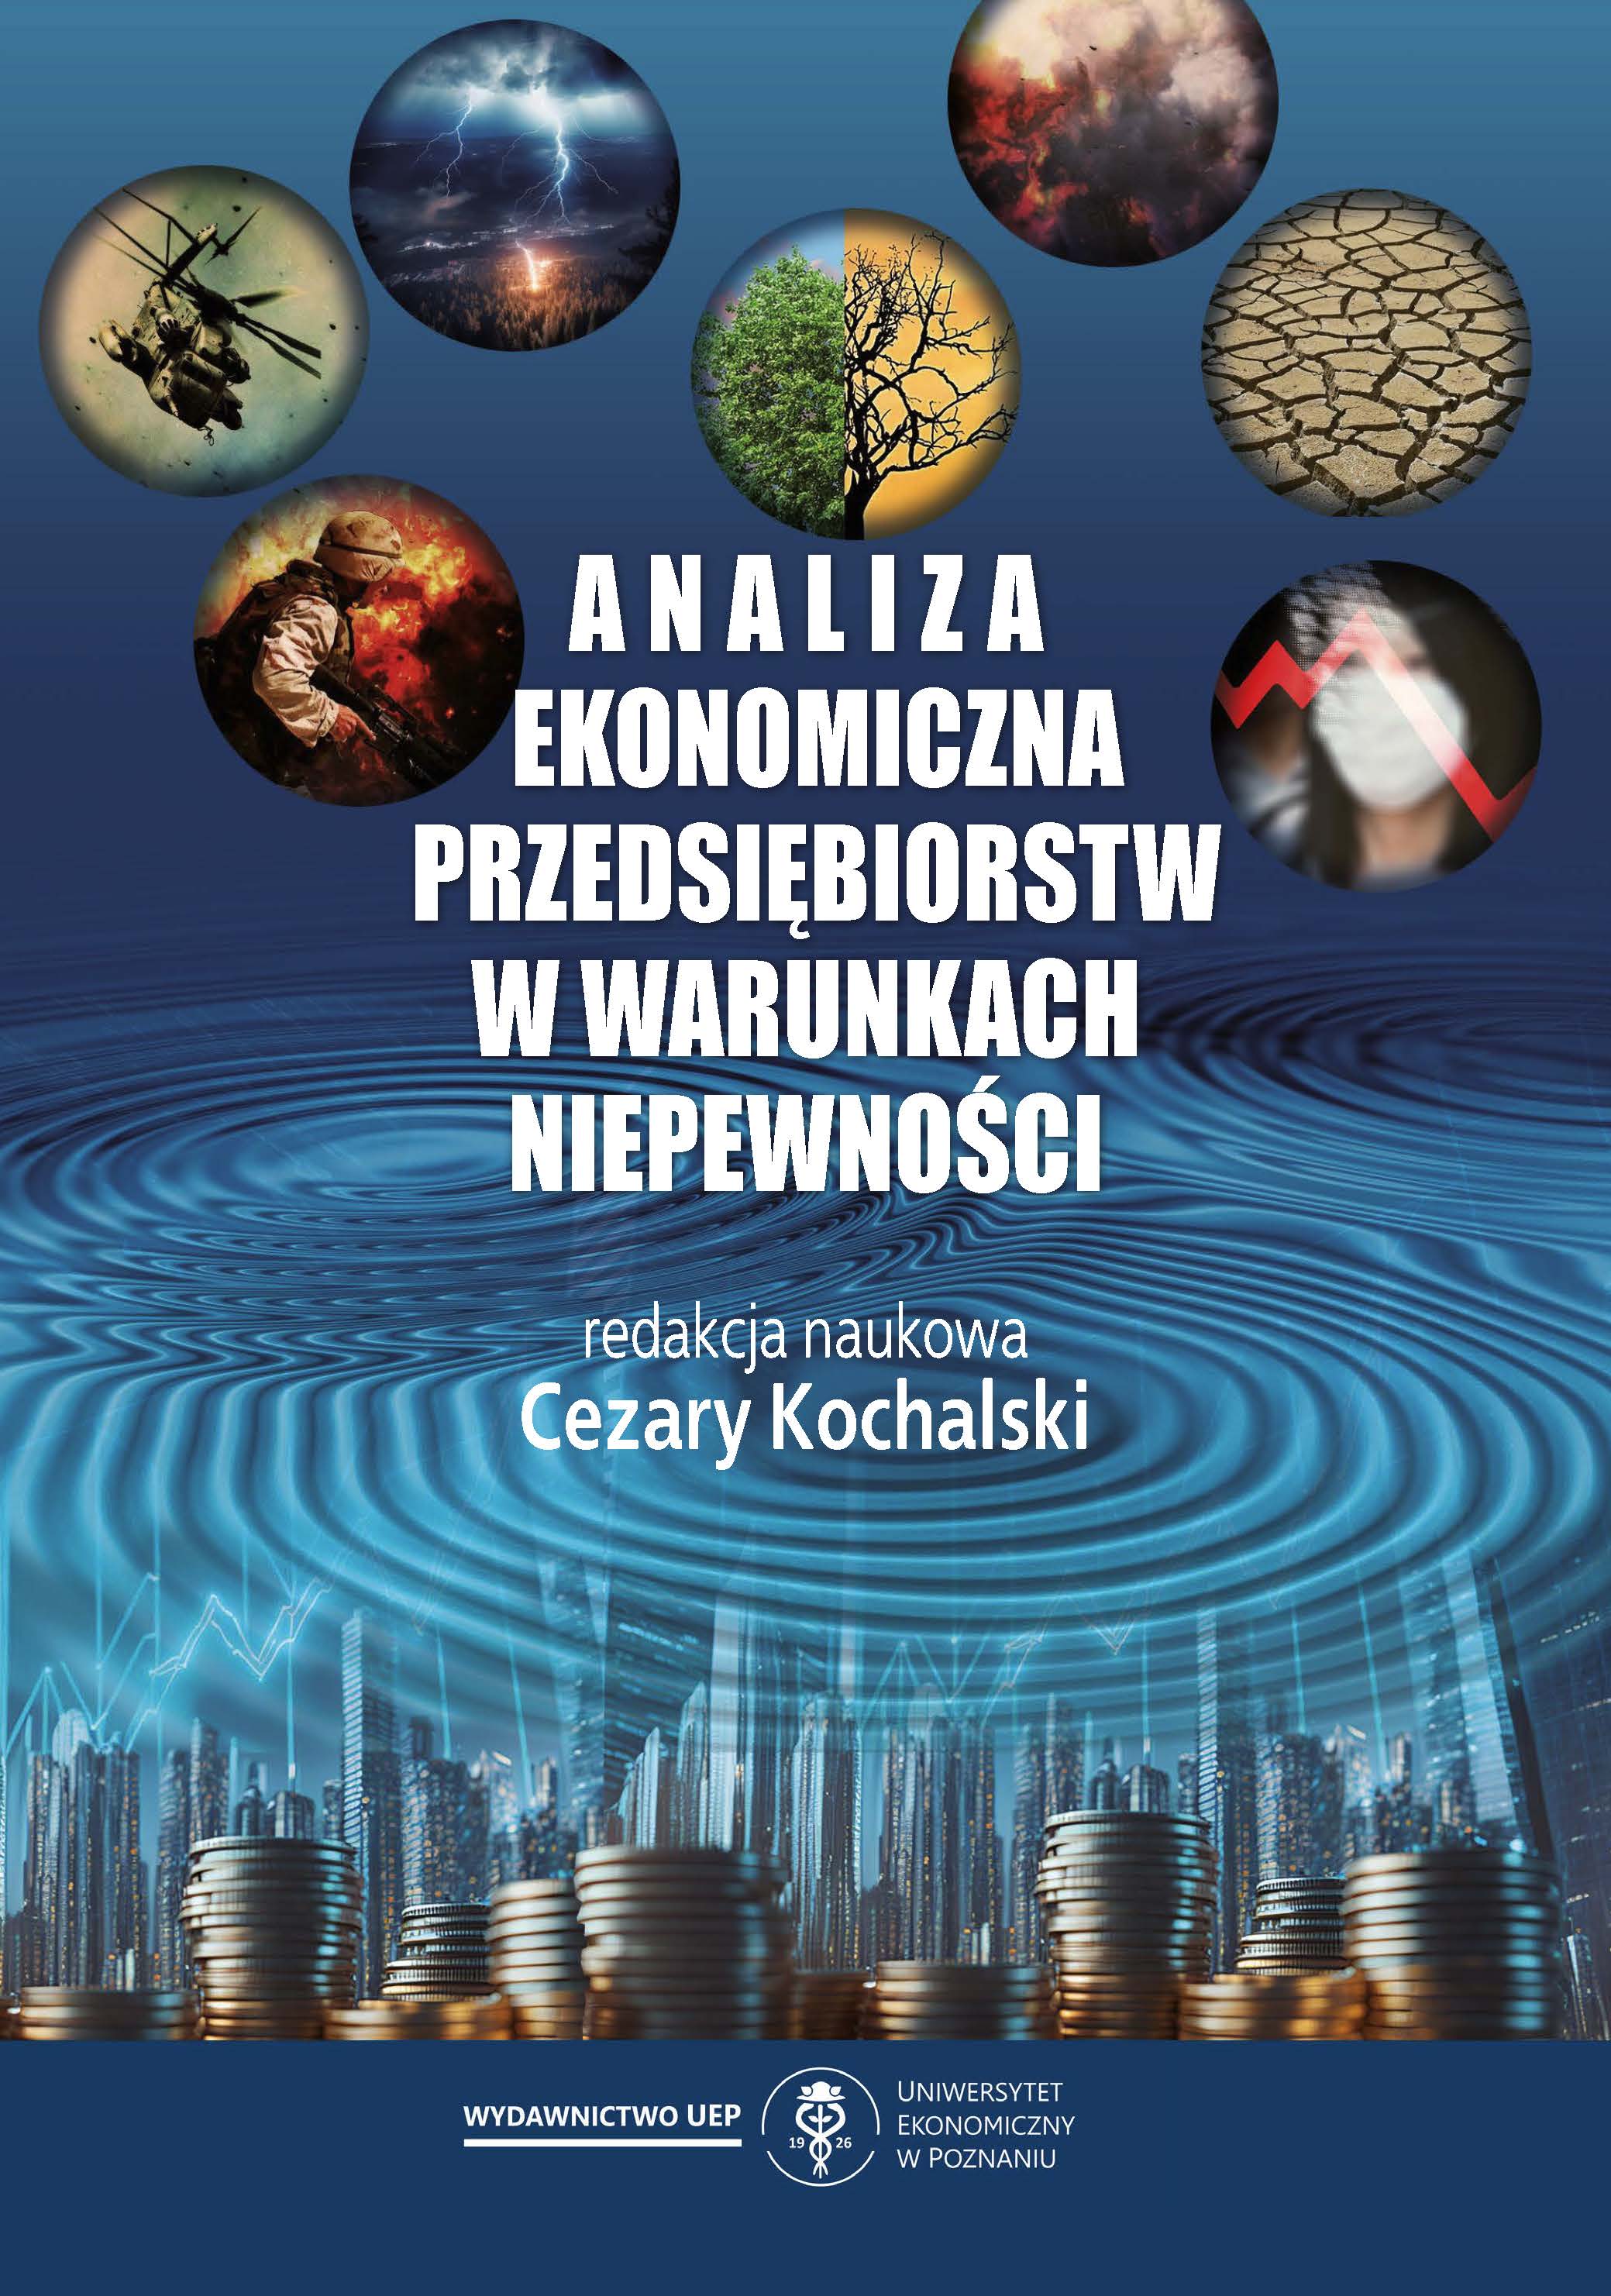 Economic analysis of an enterprise in the central bank Cover Image